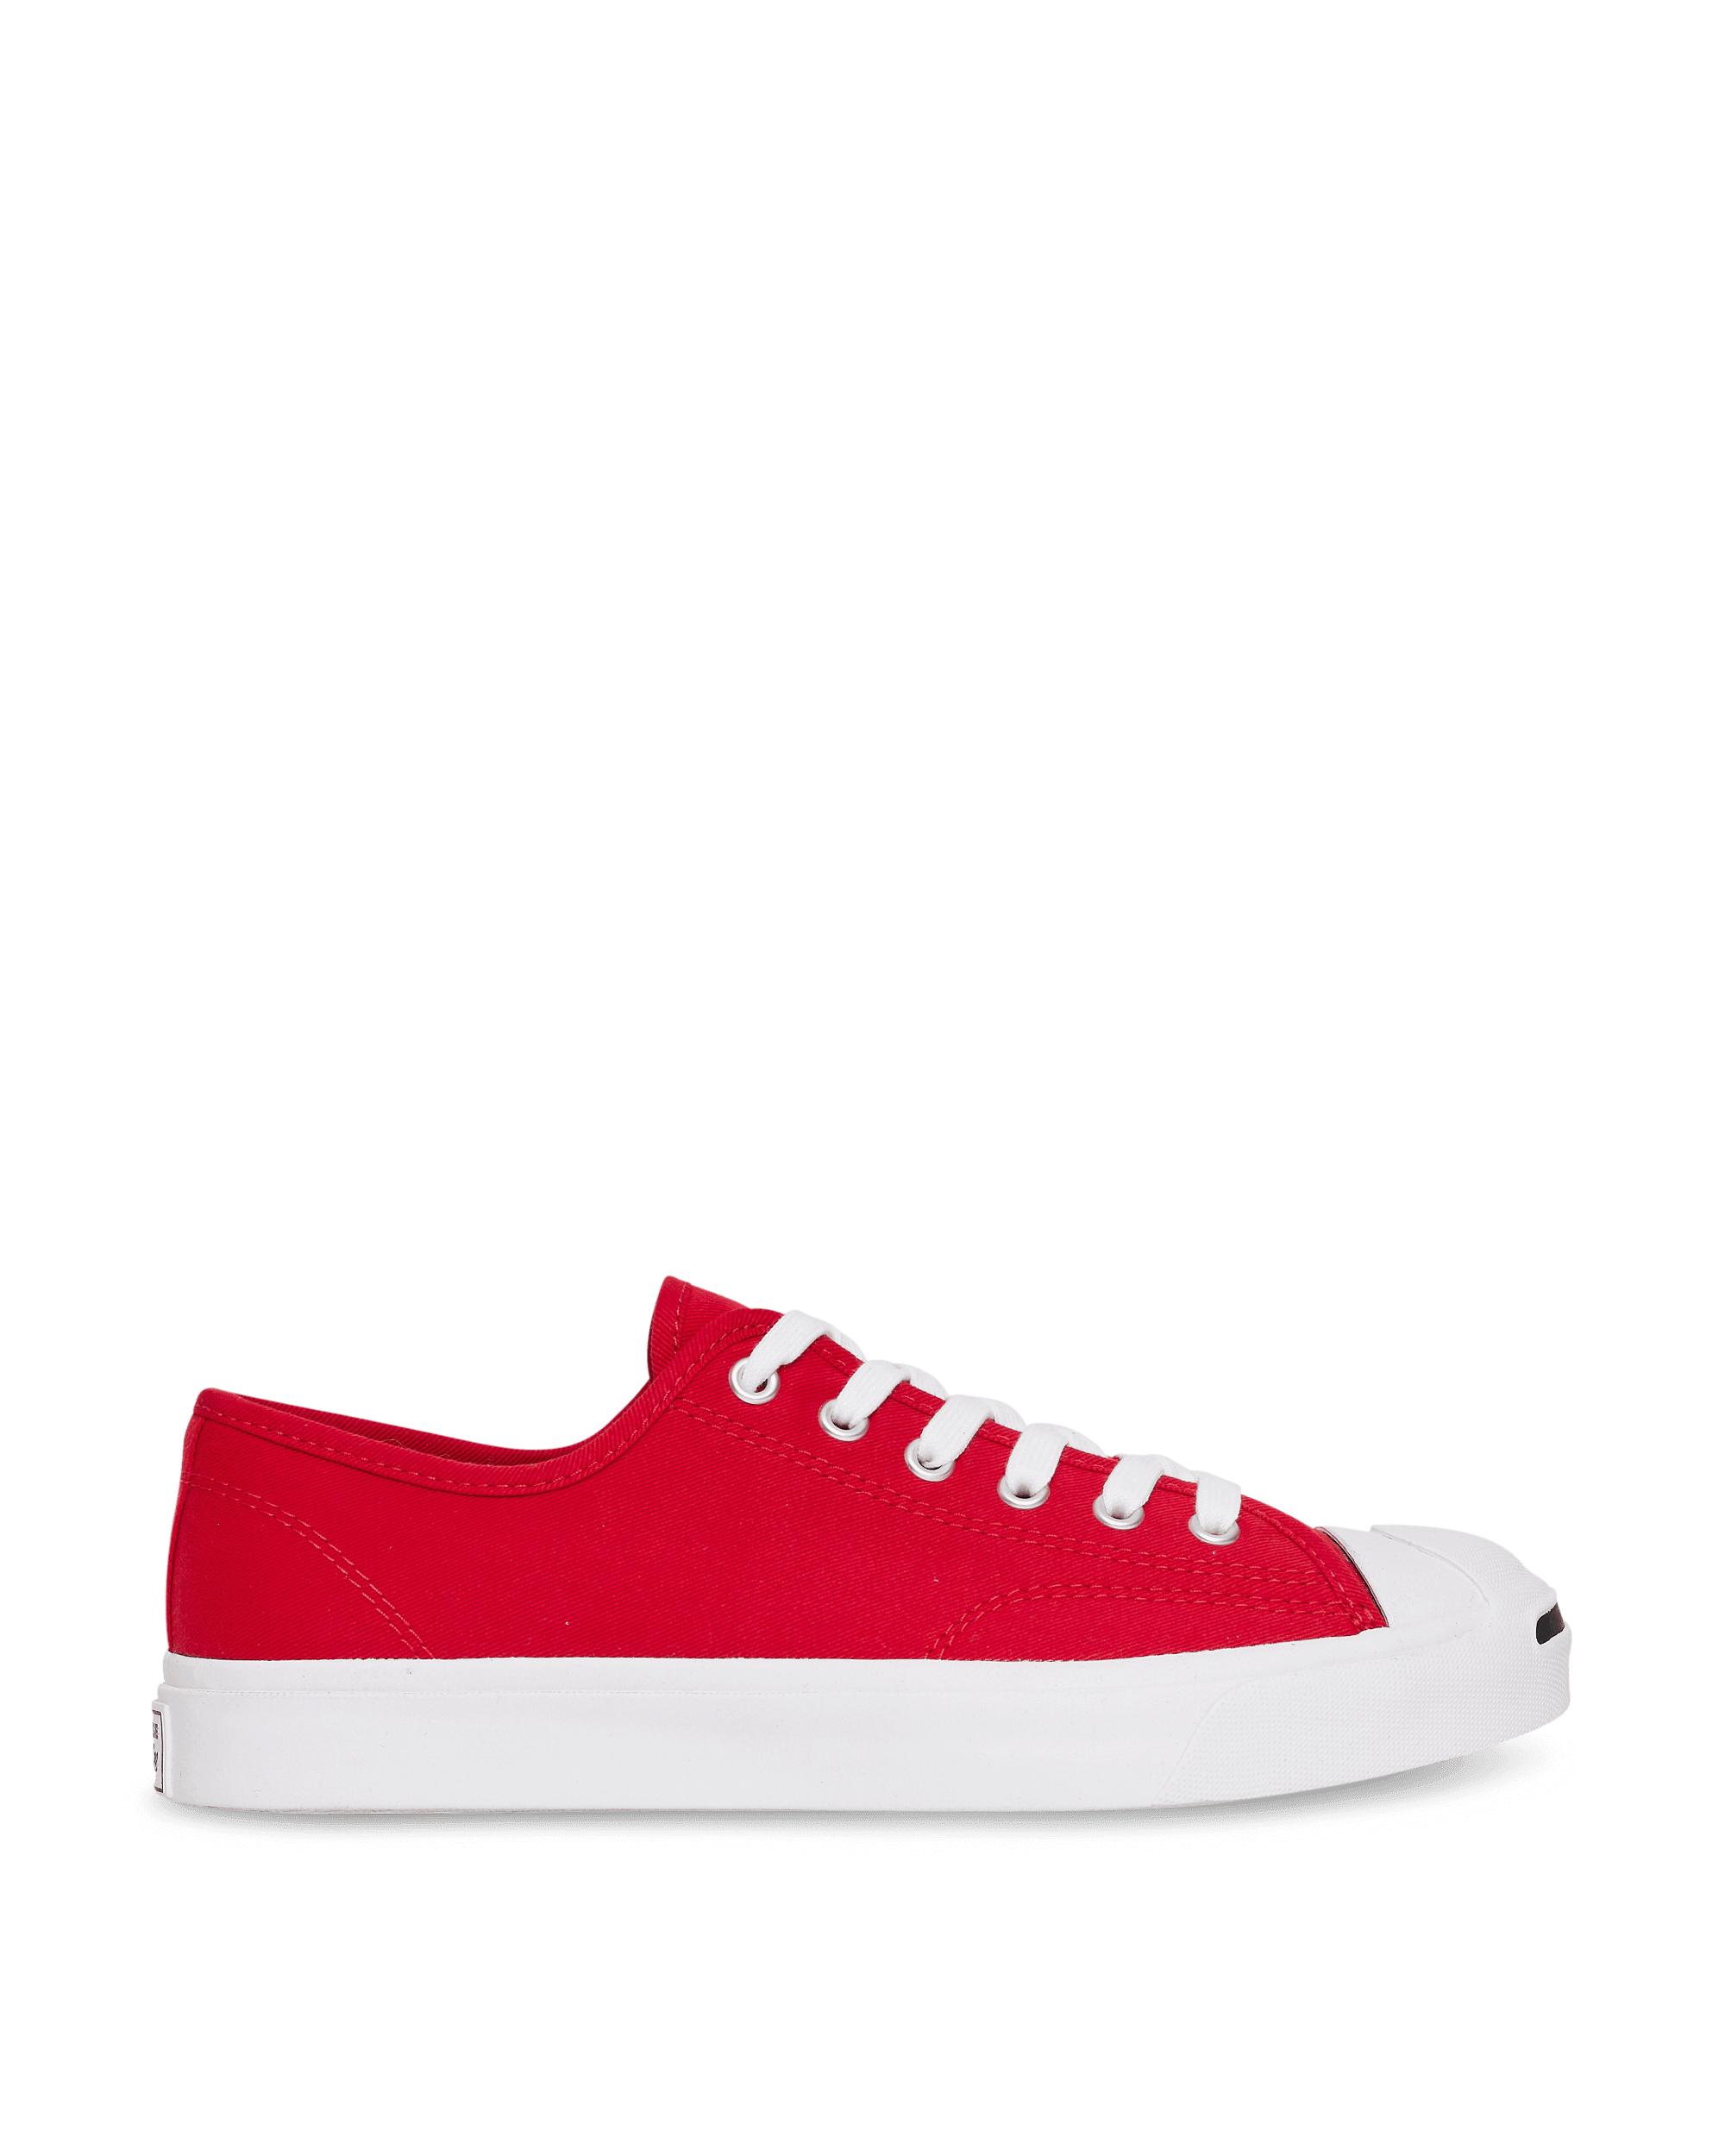 Converse Jack Purcell Sneakers in Red for Men - Save 45% - Lyst